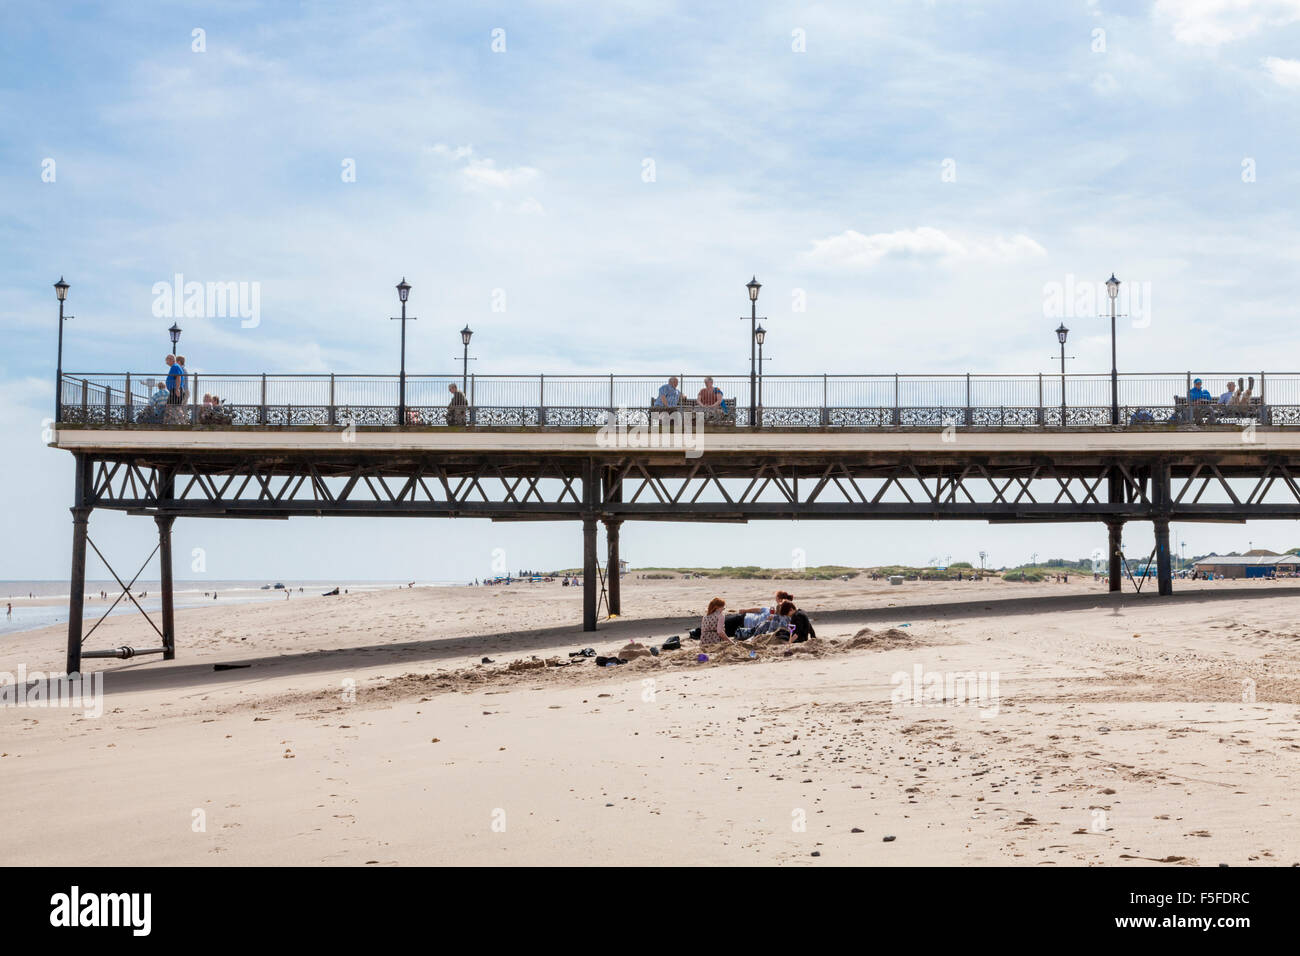 Skegness beach and pier, Skegness, Lincolnshire coast, England, UK Stock Photo